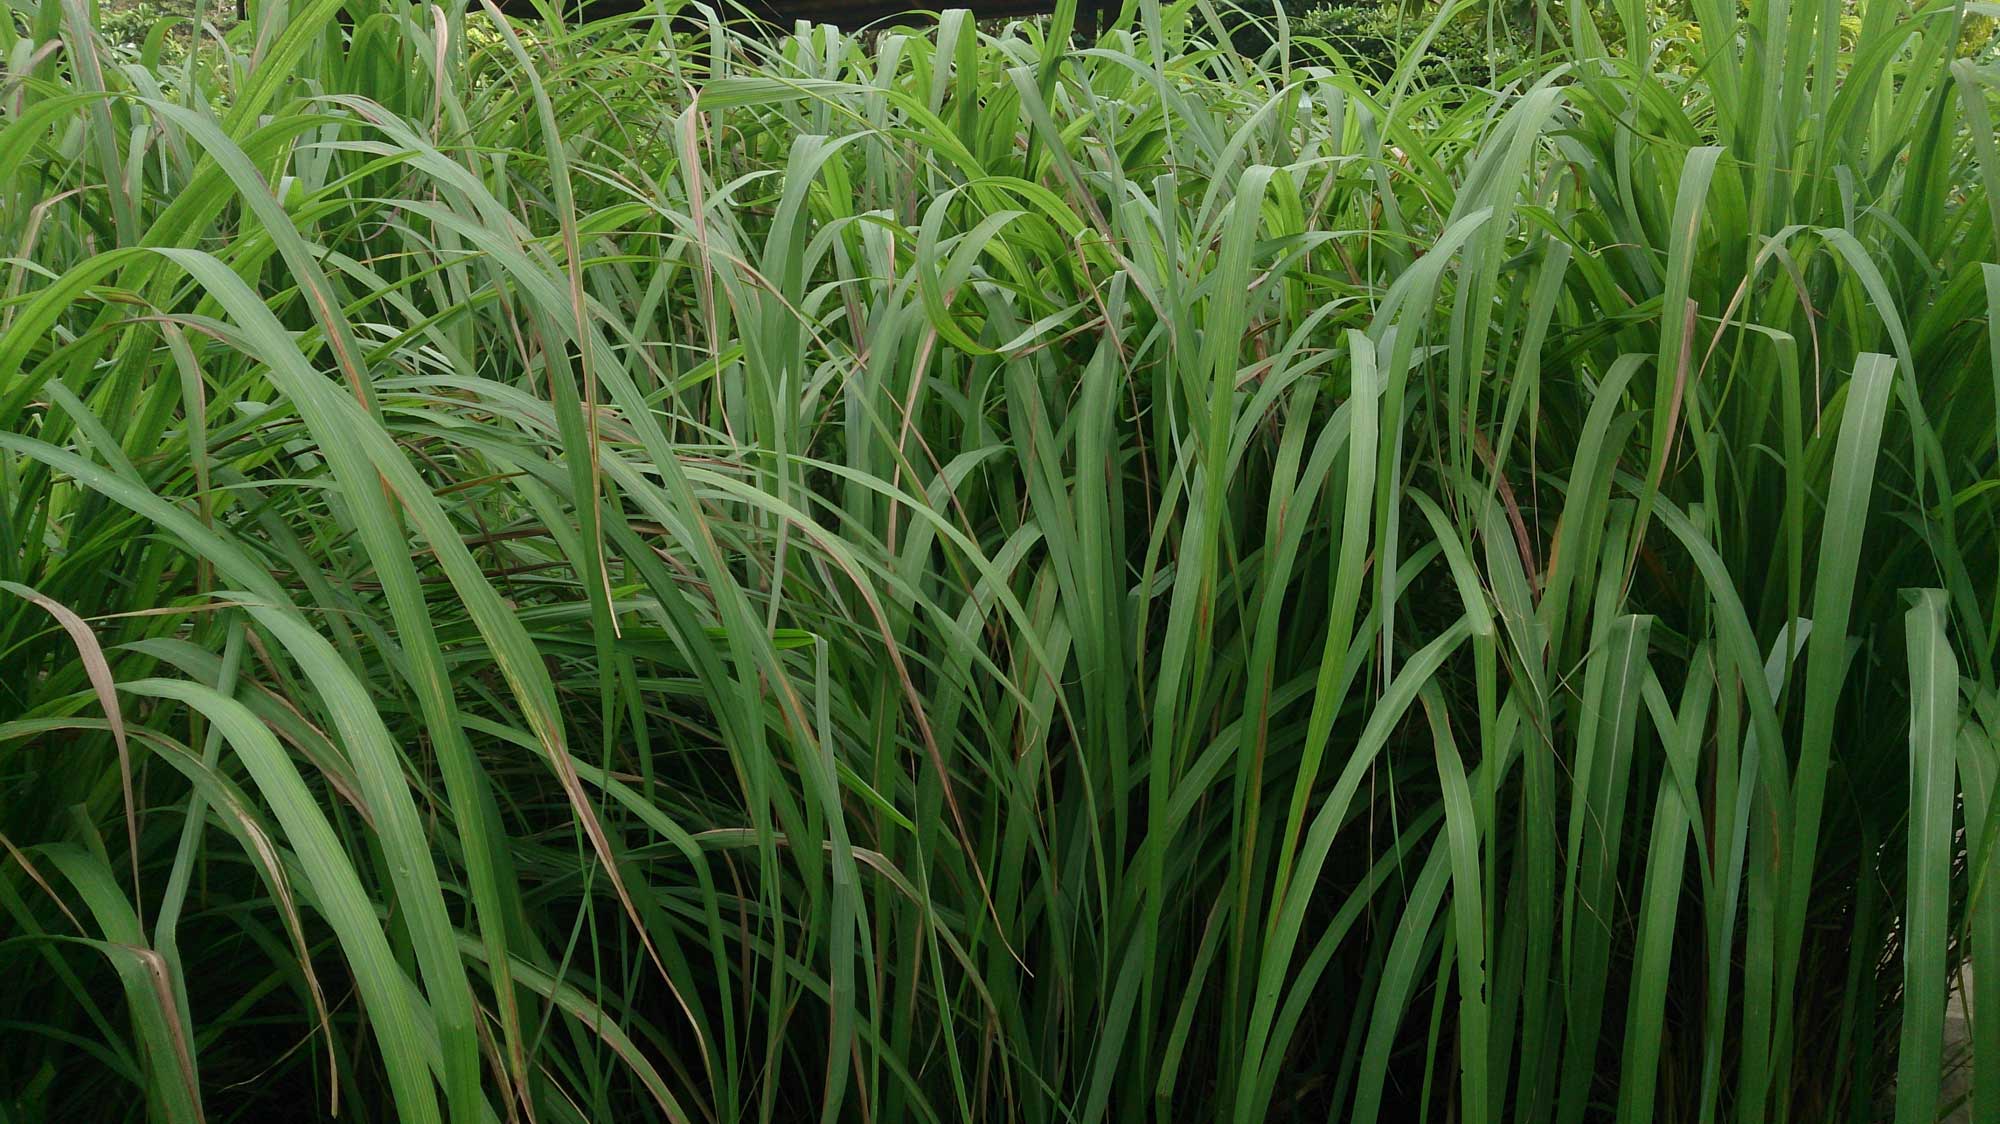 Photograph showing citronella. The photograph shows long, green grass leaves.